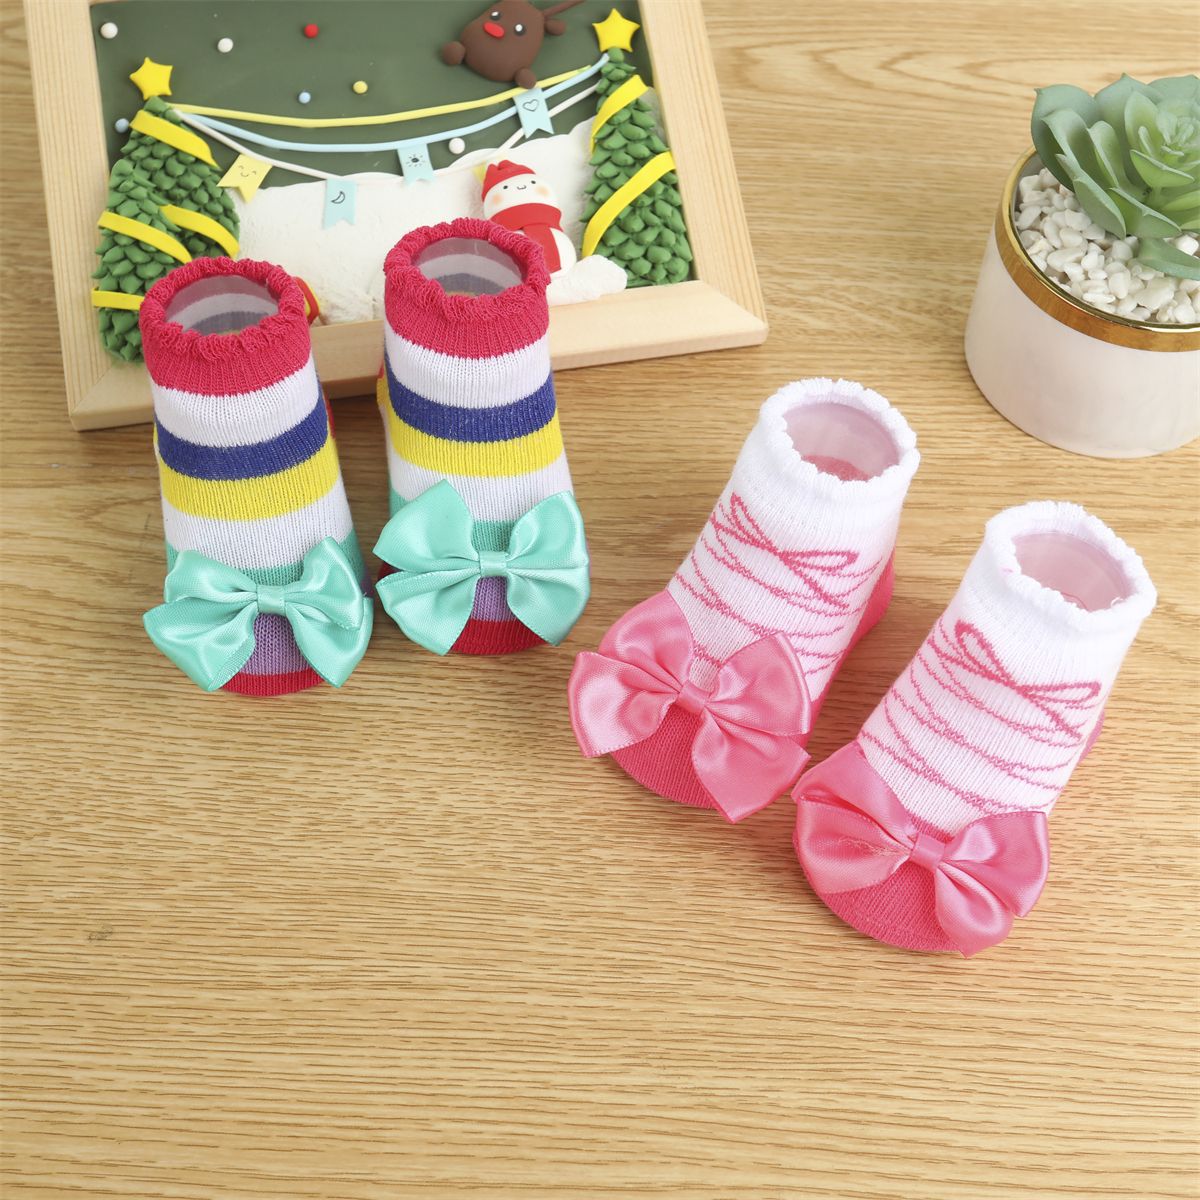 Chaussettes Décoratives Baby Bowknot 2-pack